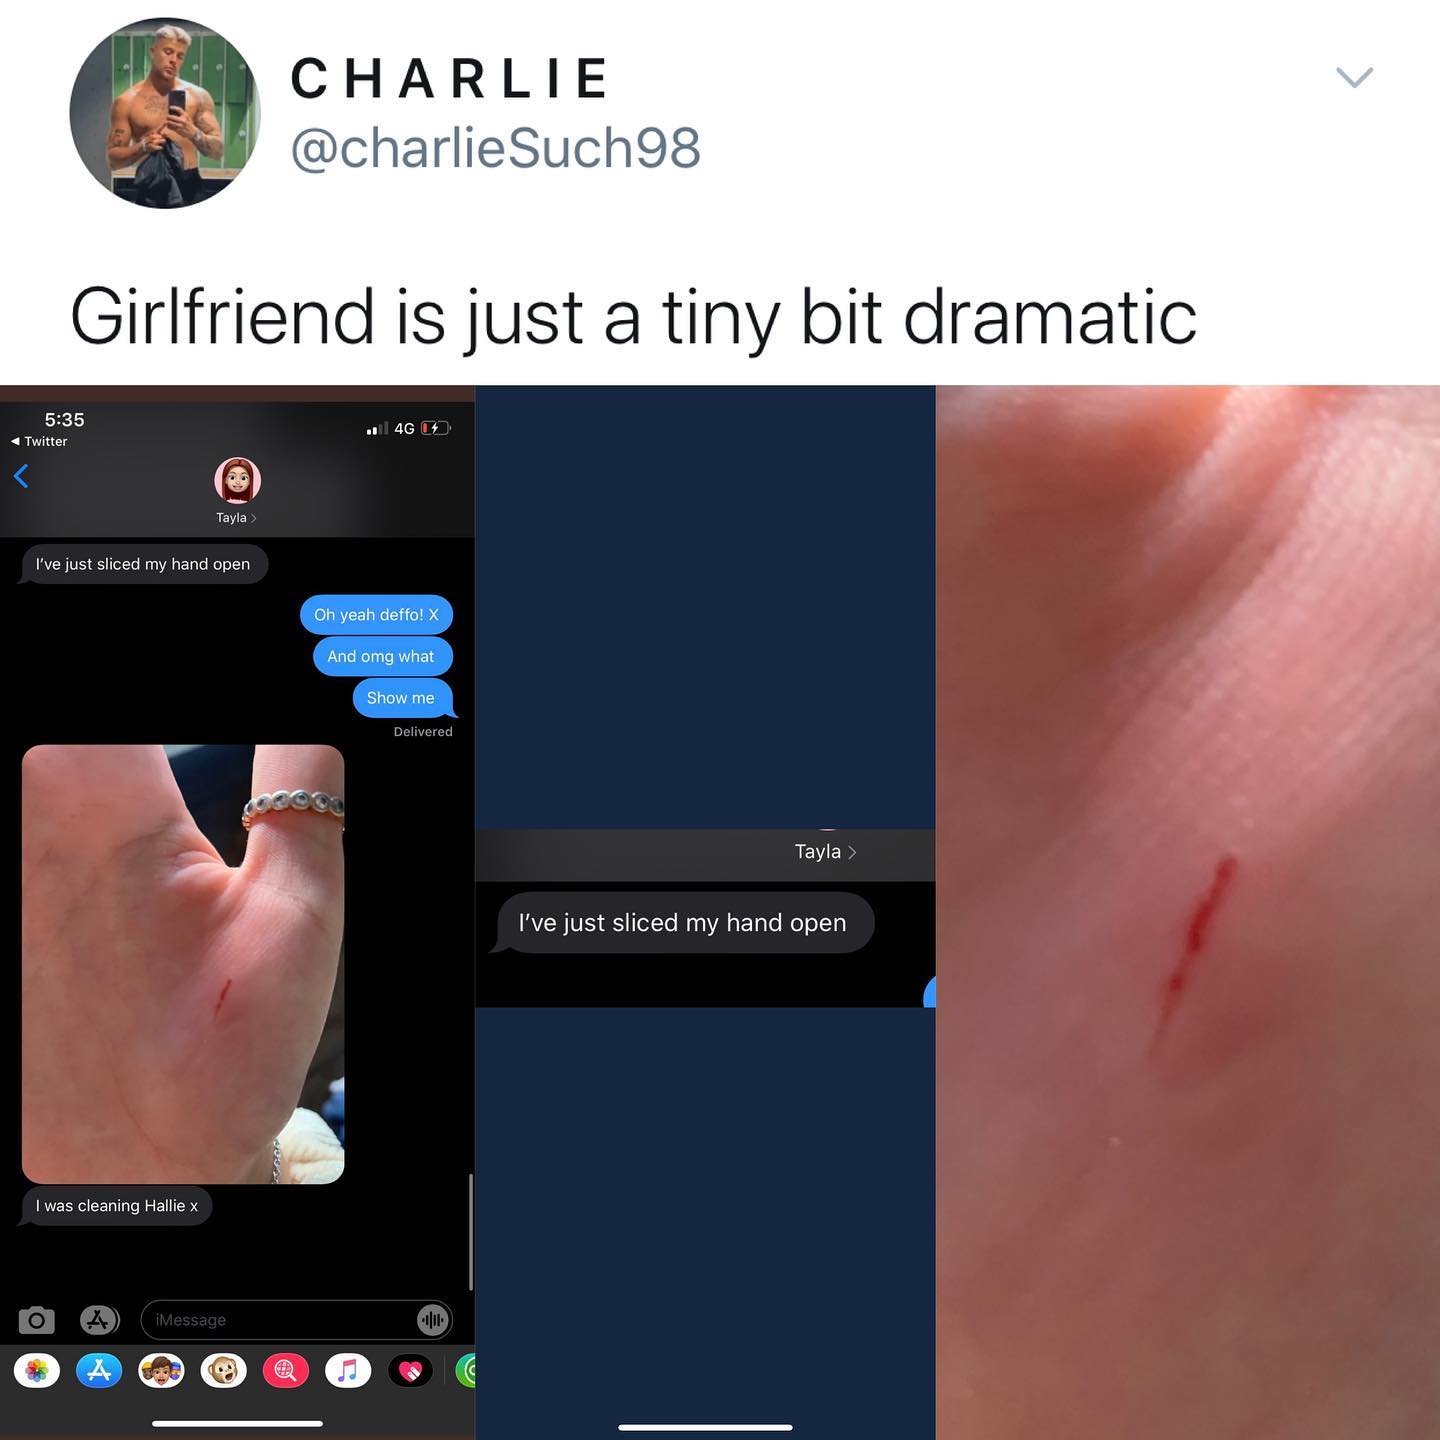 dank memes - twitter - lip - V Charlie Such98 Girlfriend is just a tiny bit dramatic Twitter . 46 Tayla I've just sliced my hand open Oh yeah deffo! X And omg what Show me Delivered Tayla > I've just sliced my hand open I was cleaning Hallie x 4 iMessage 